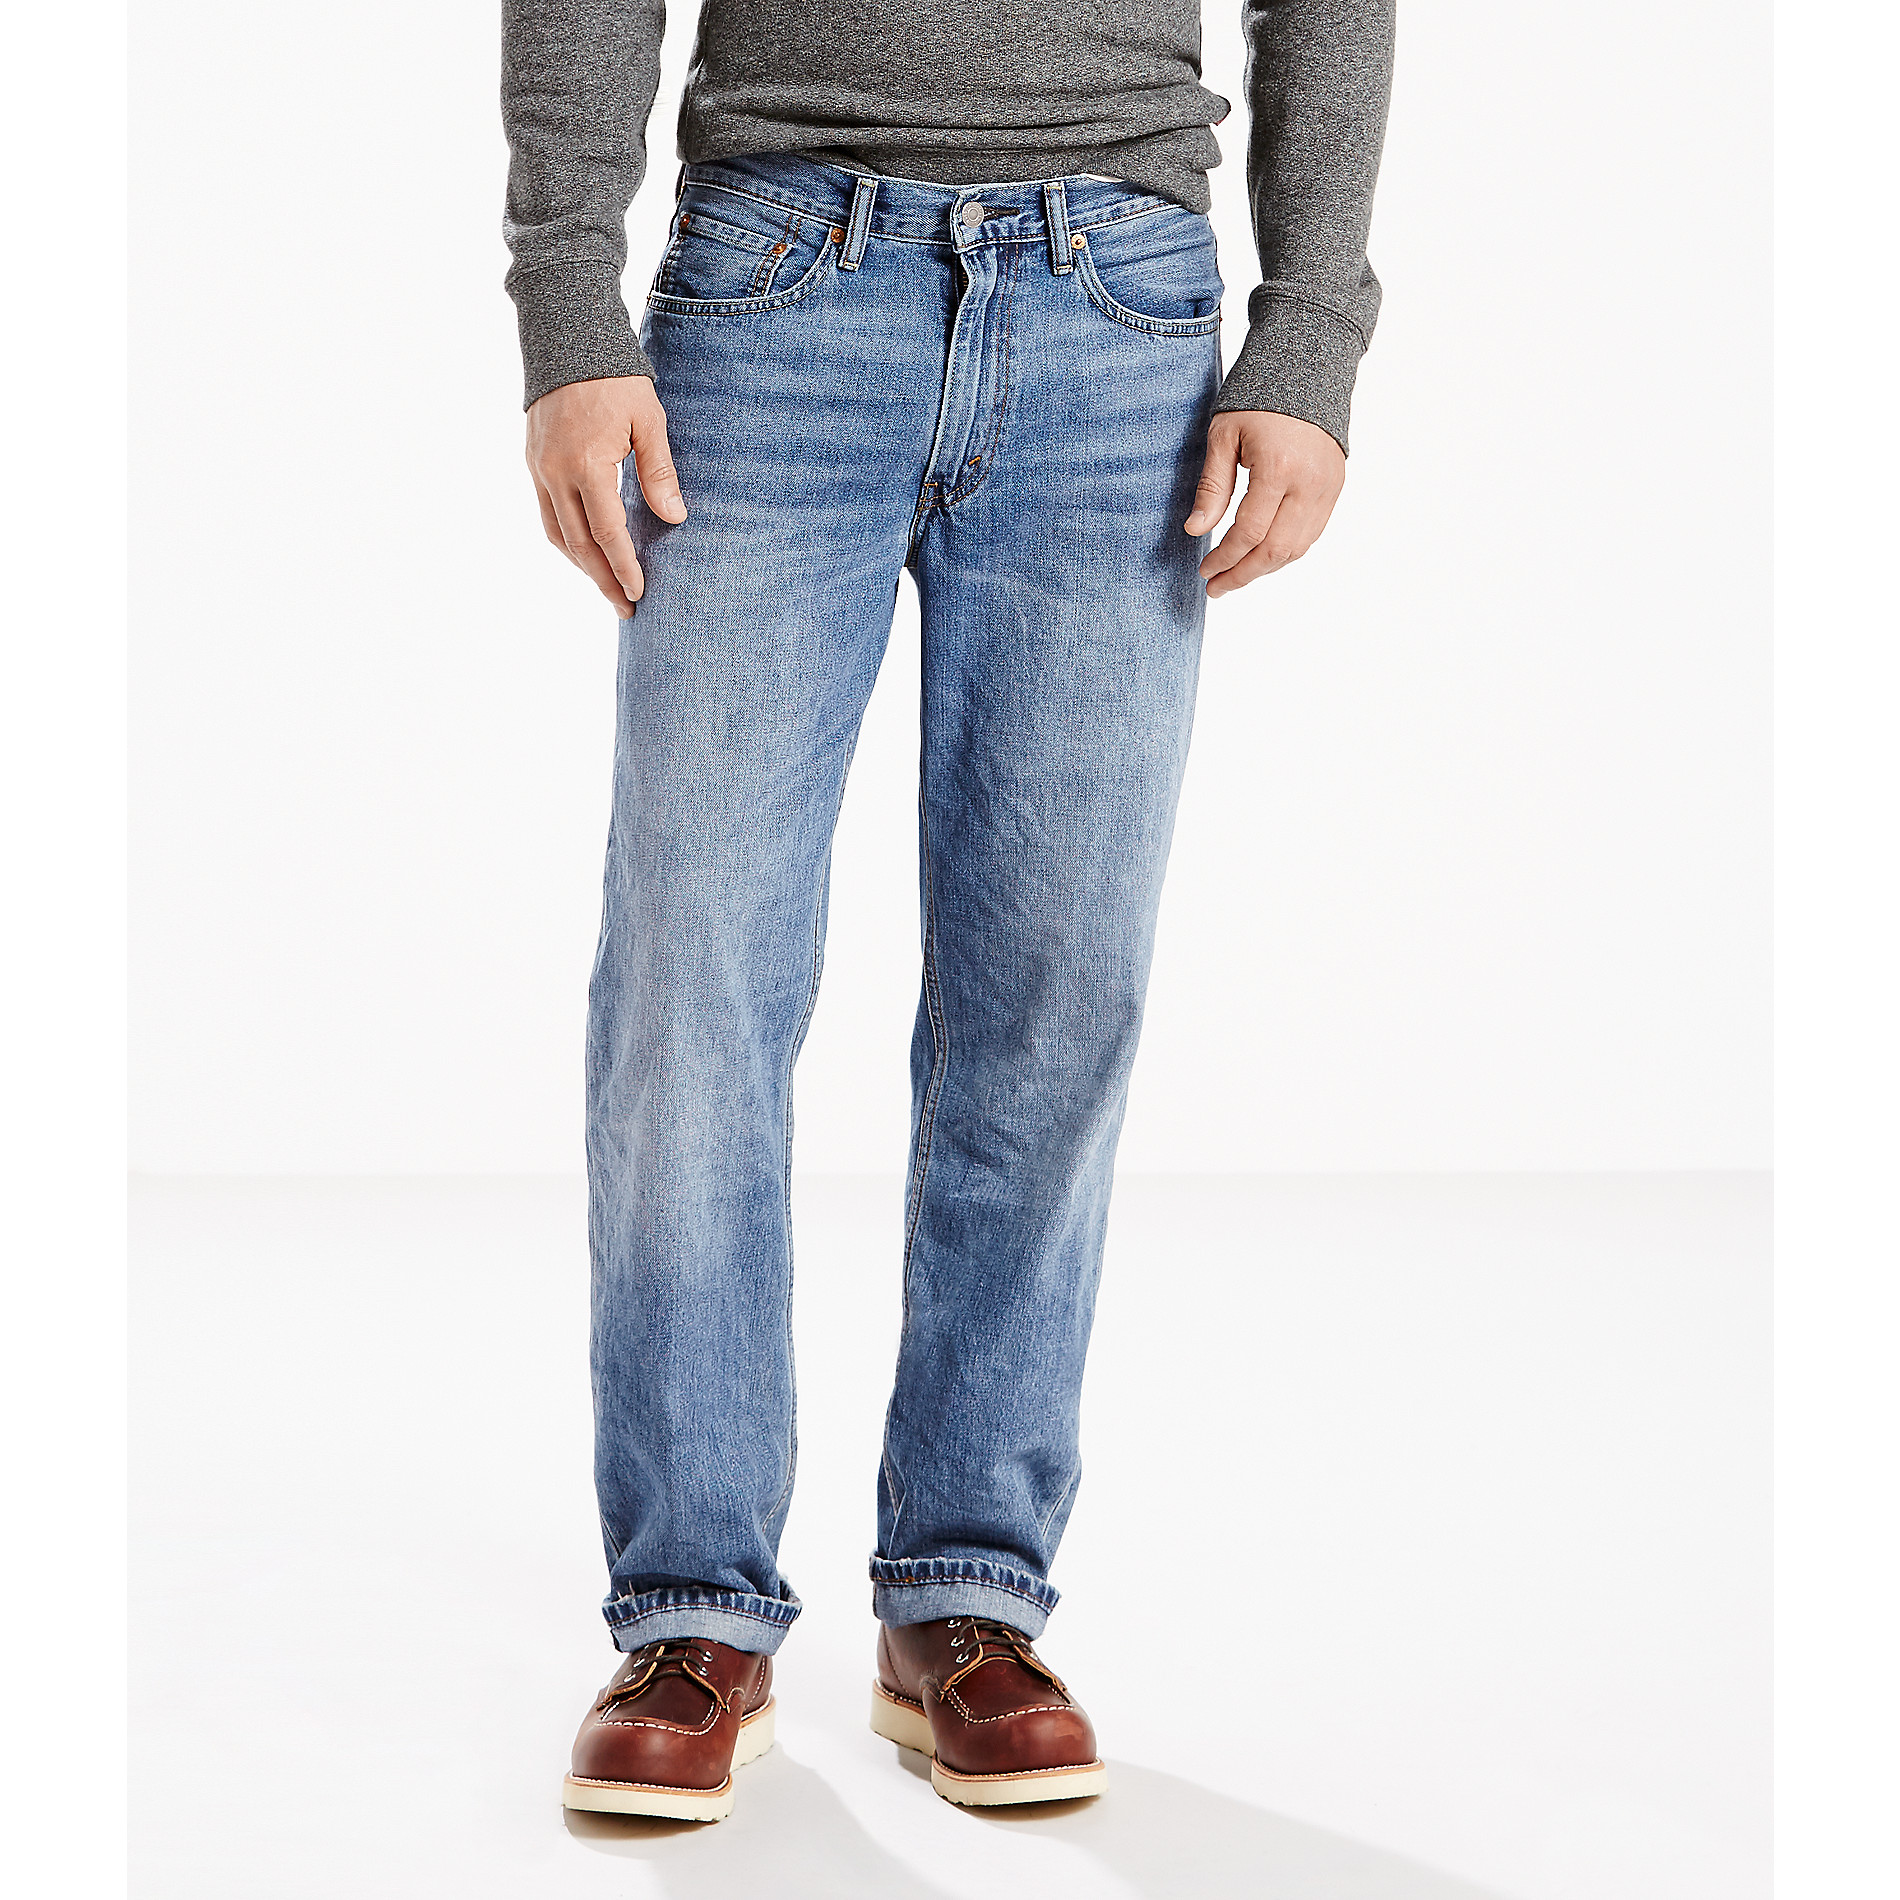 Relaxed Fit Levi's Men's Jeans - Sears